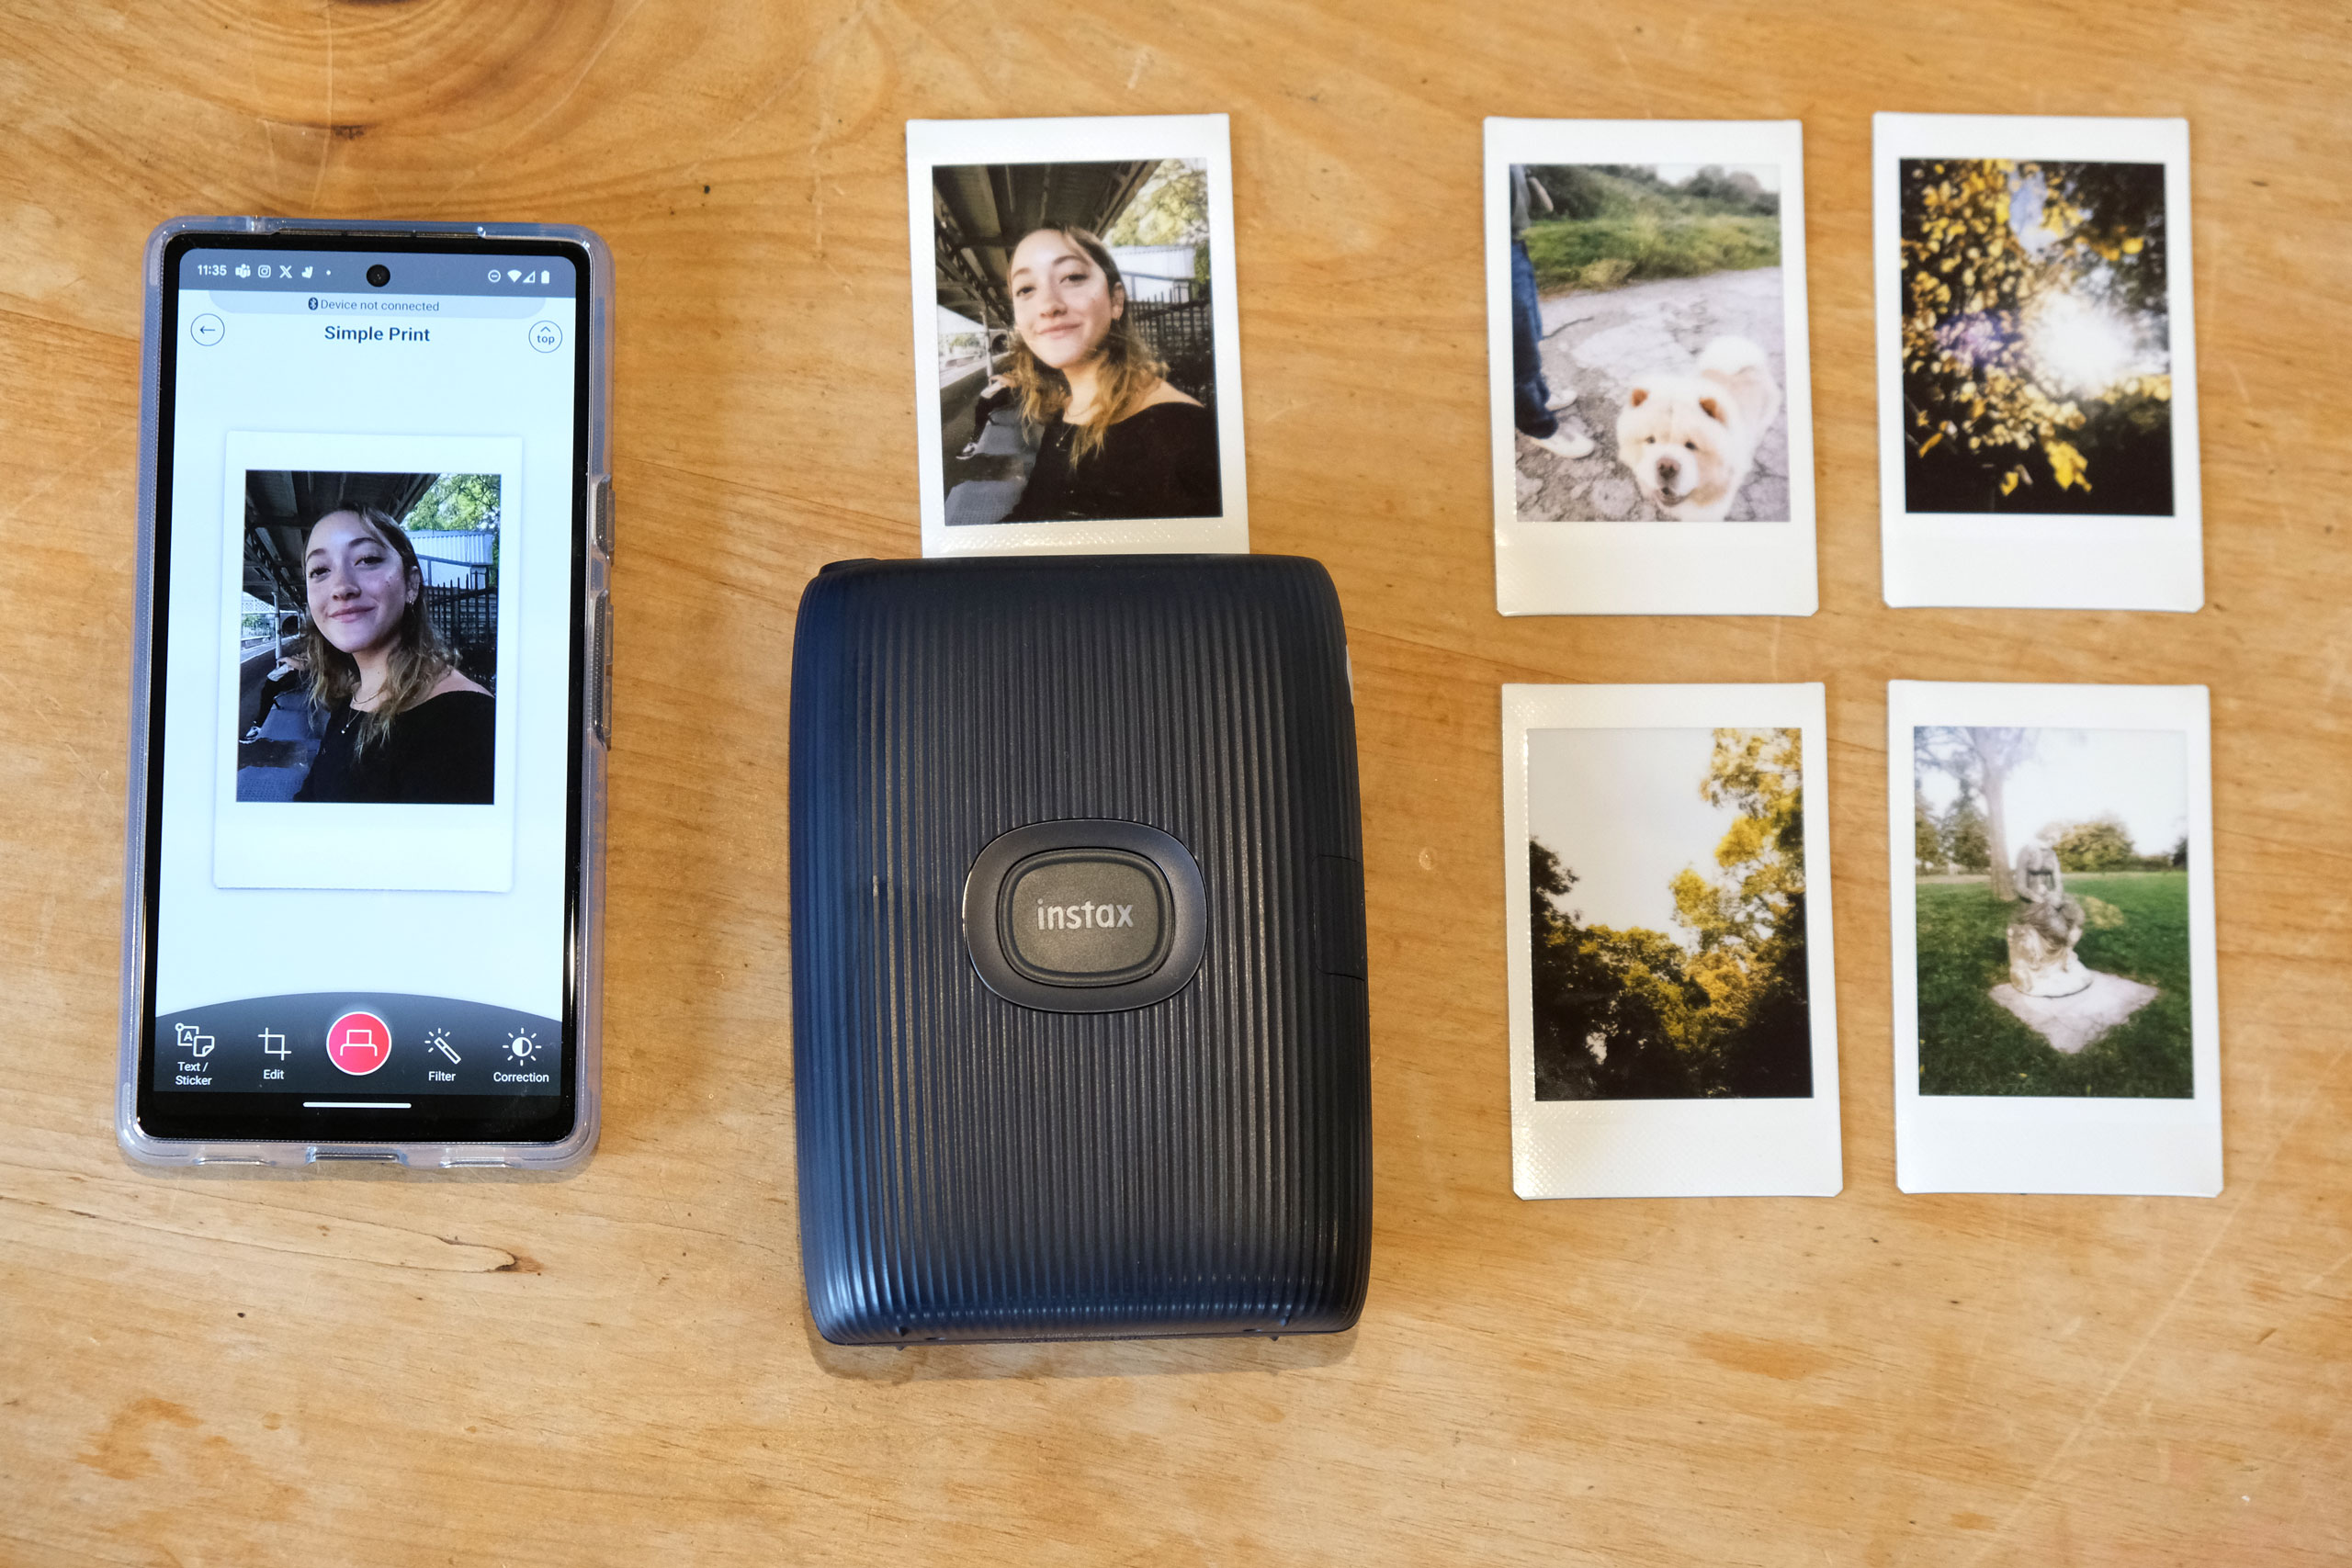 Printing Instax mini prints taken with Instax Pal using a smartphone and Instax mini Link printer